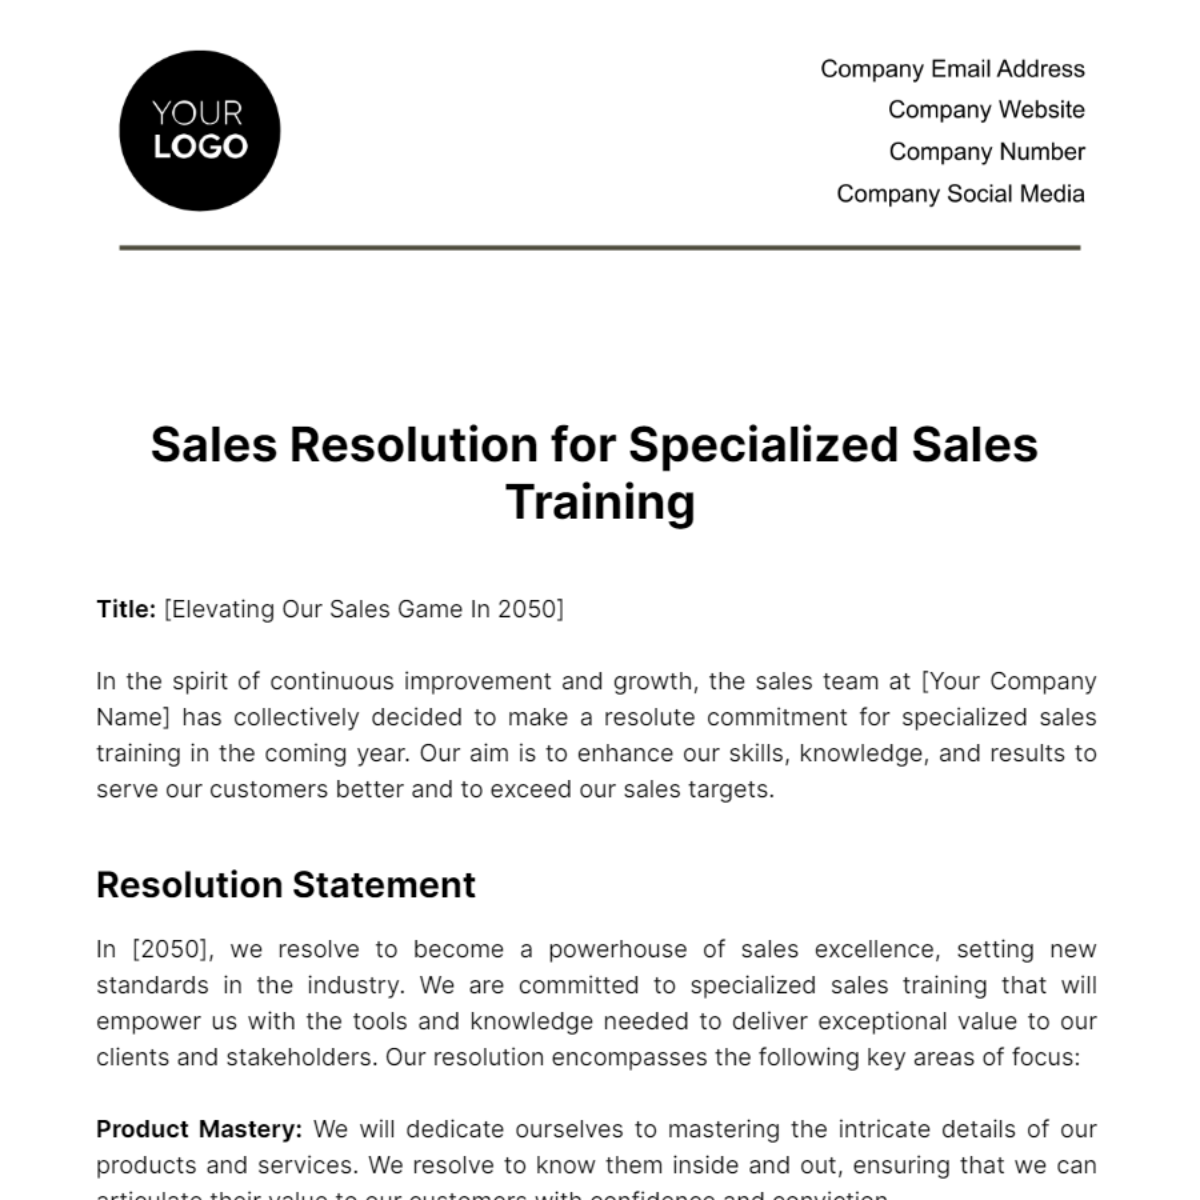 Free Sales Resolution for Specialized Sales Training Template